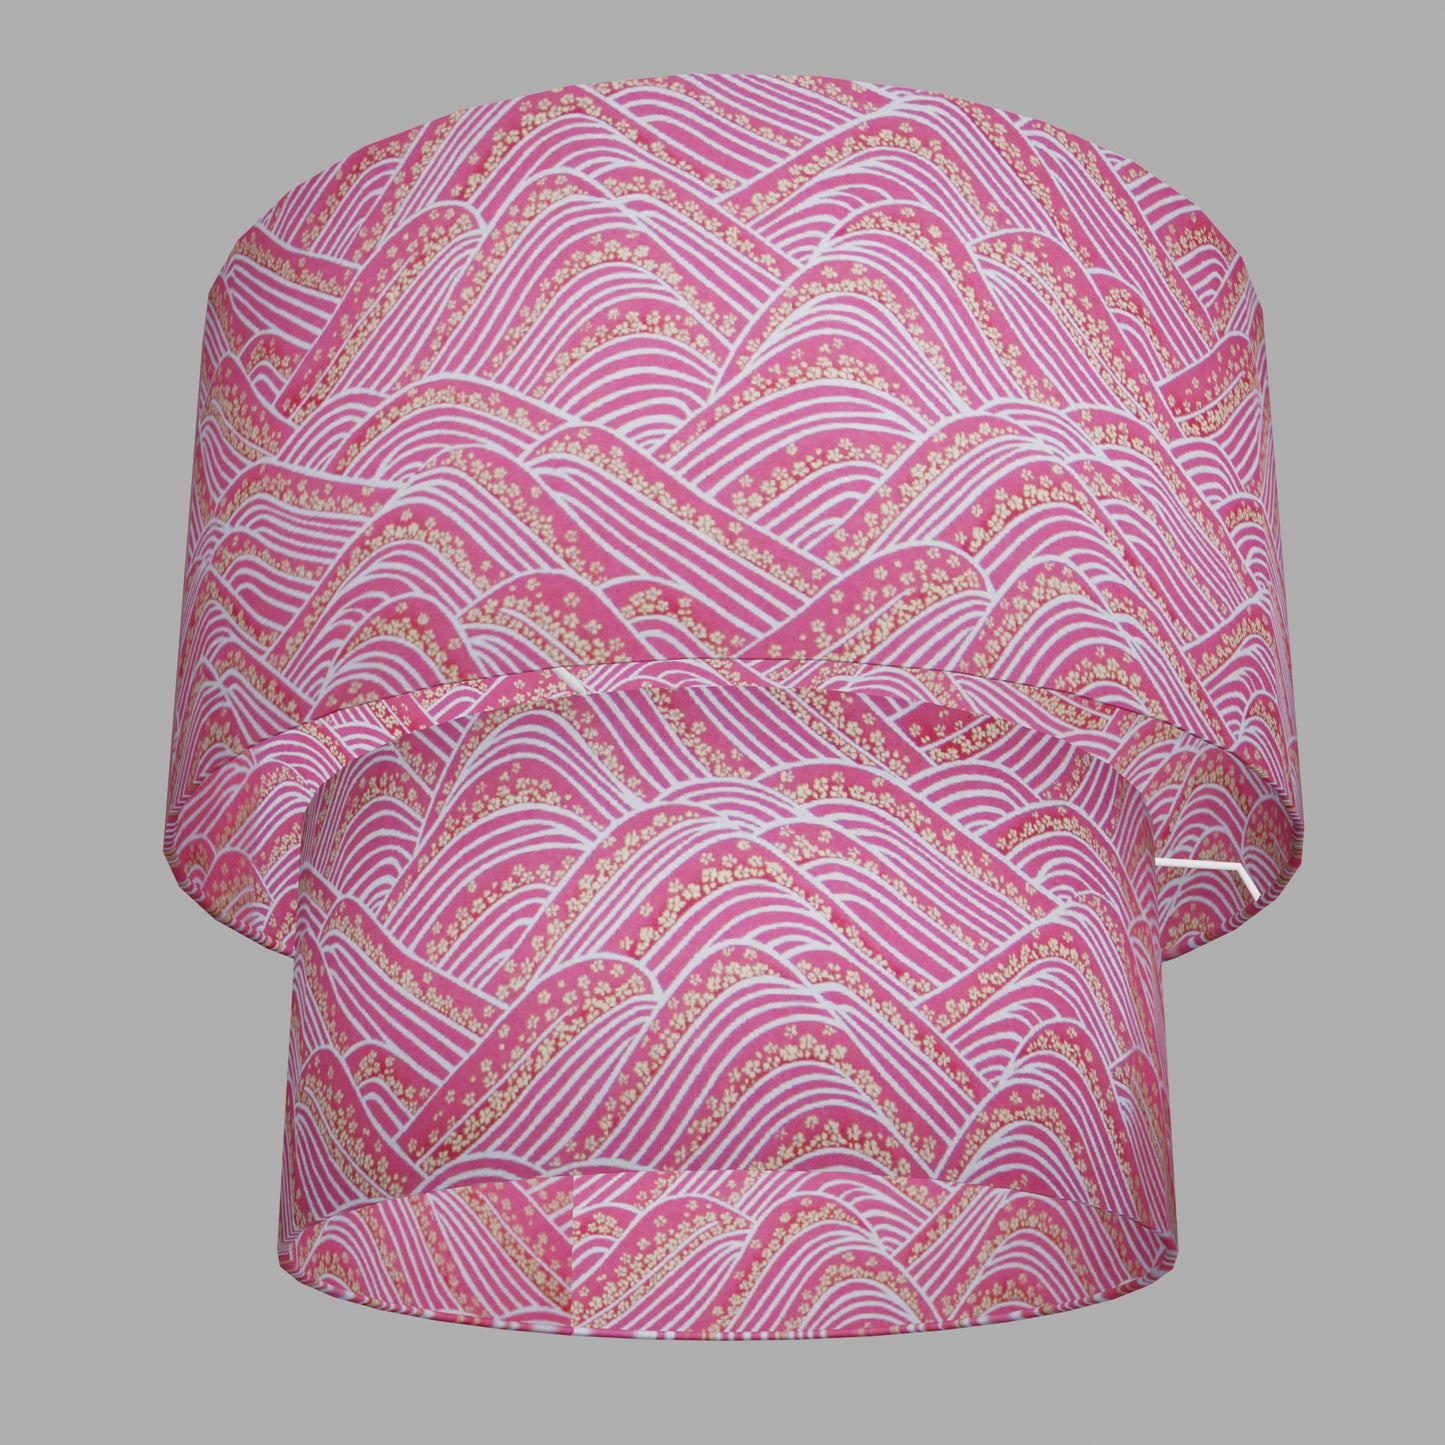 2 Tier Lamp Shade - W04 - Pink Hills with Gold Flowers, 40cm x 20cm & 30cm x 15cm